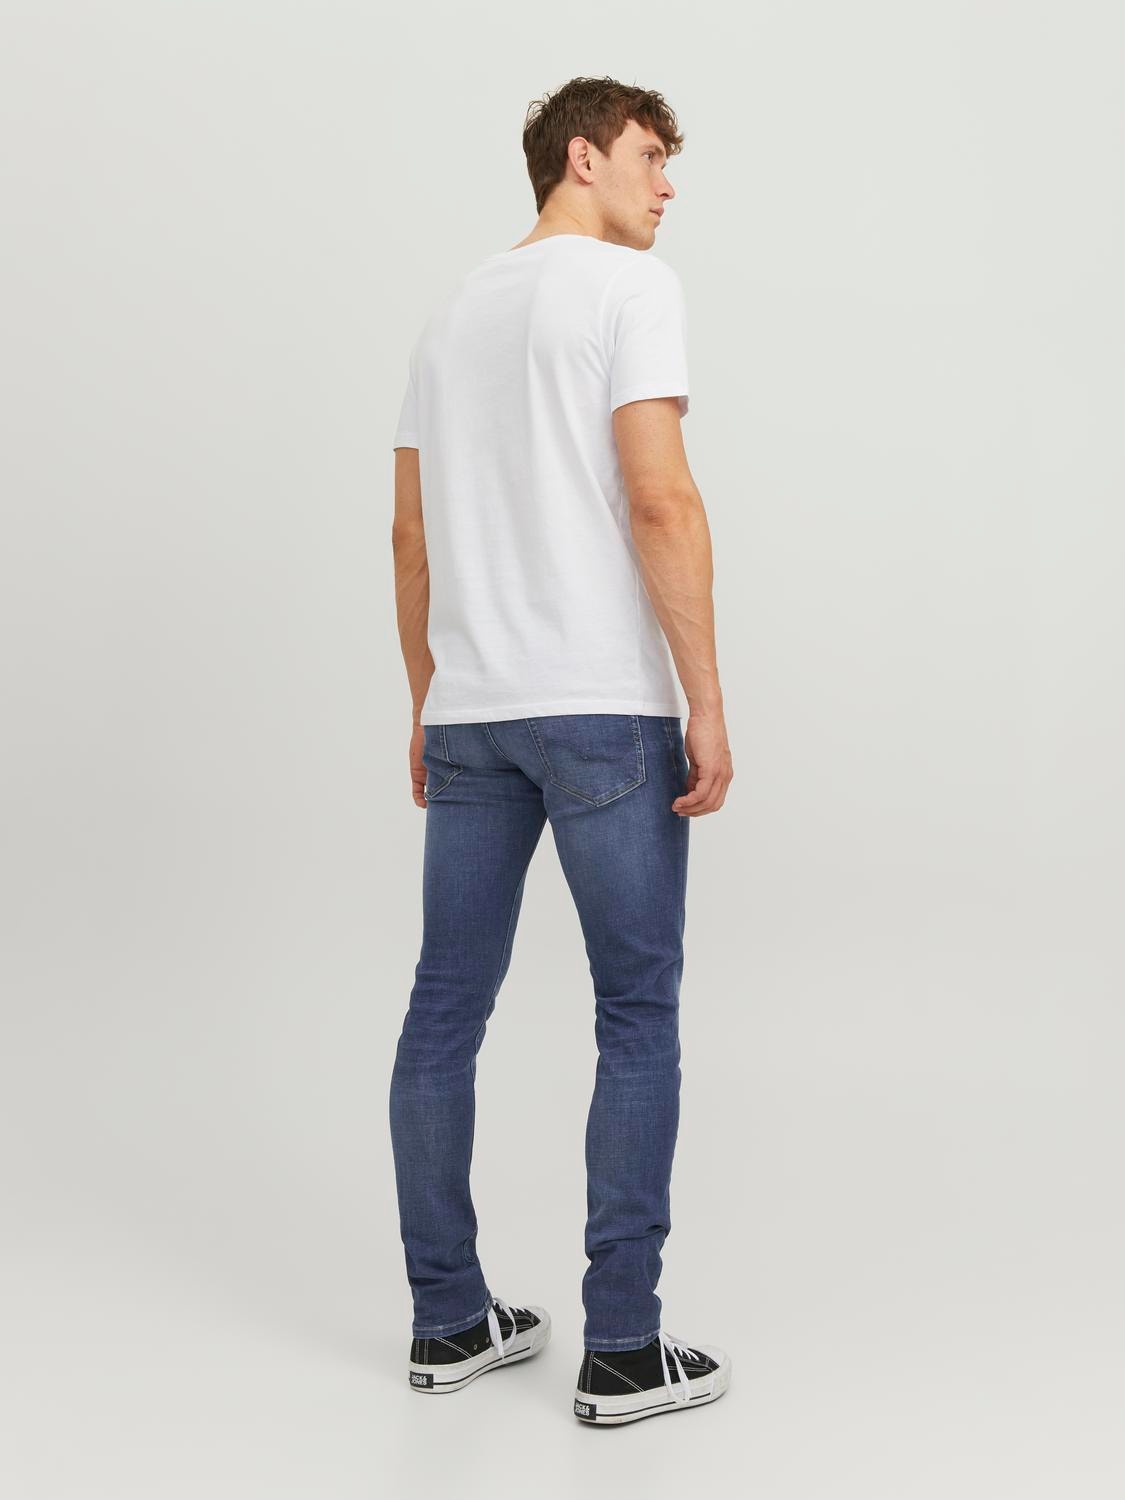 Up To 72% Off on Men's Super Stretch Slim Fit